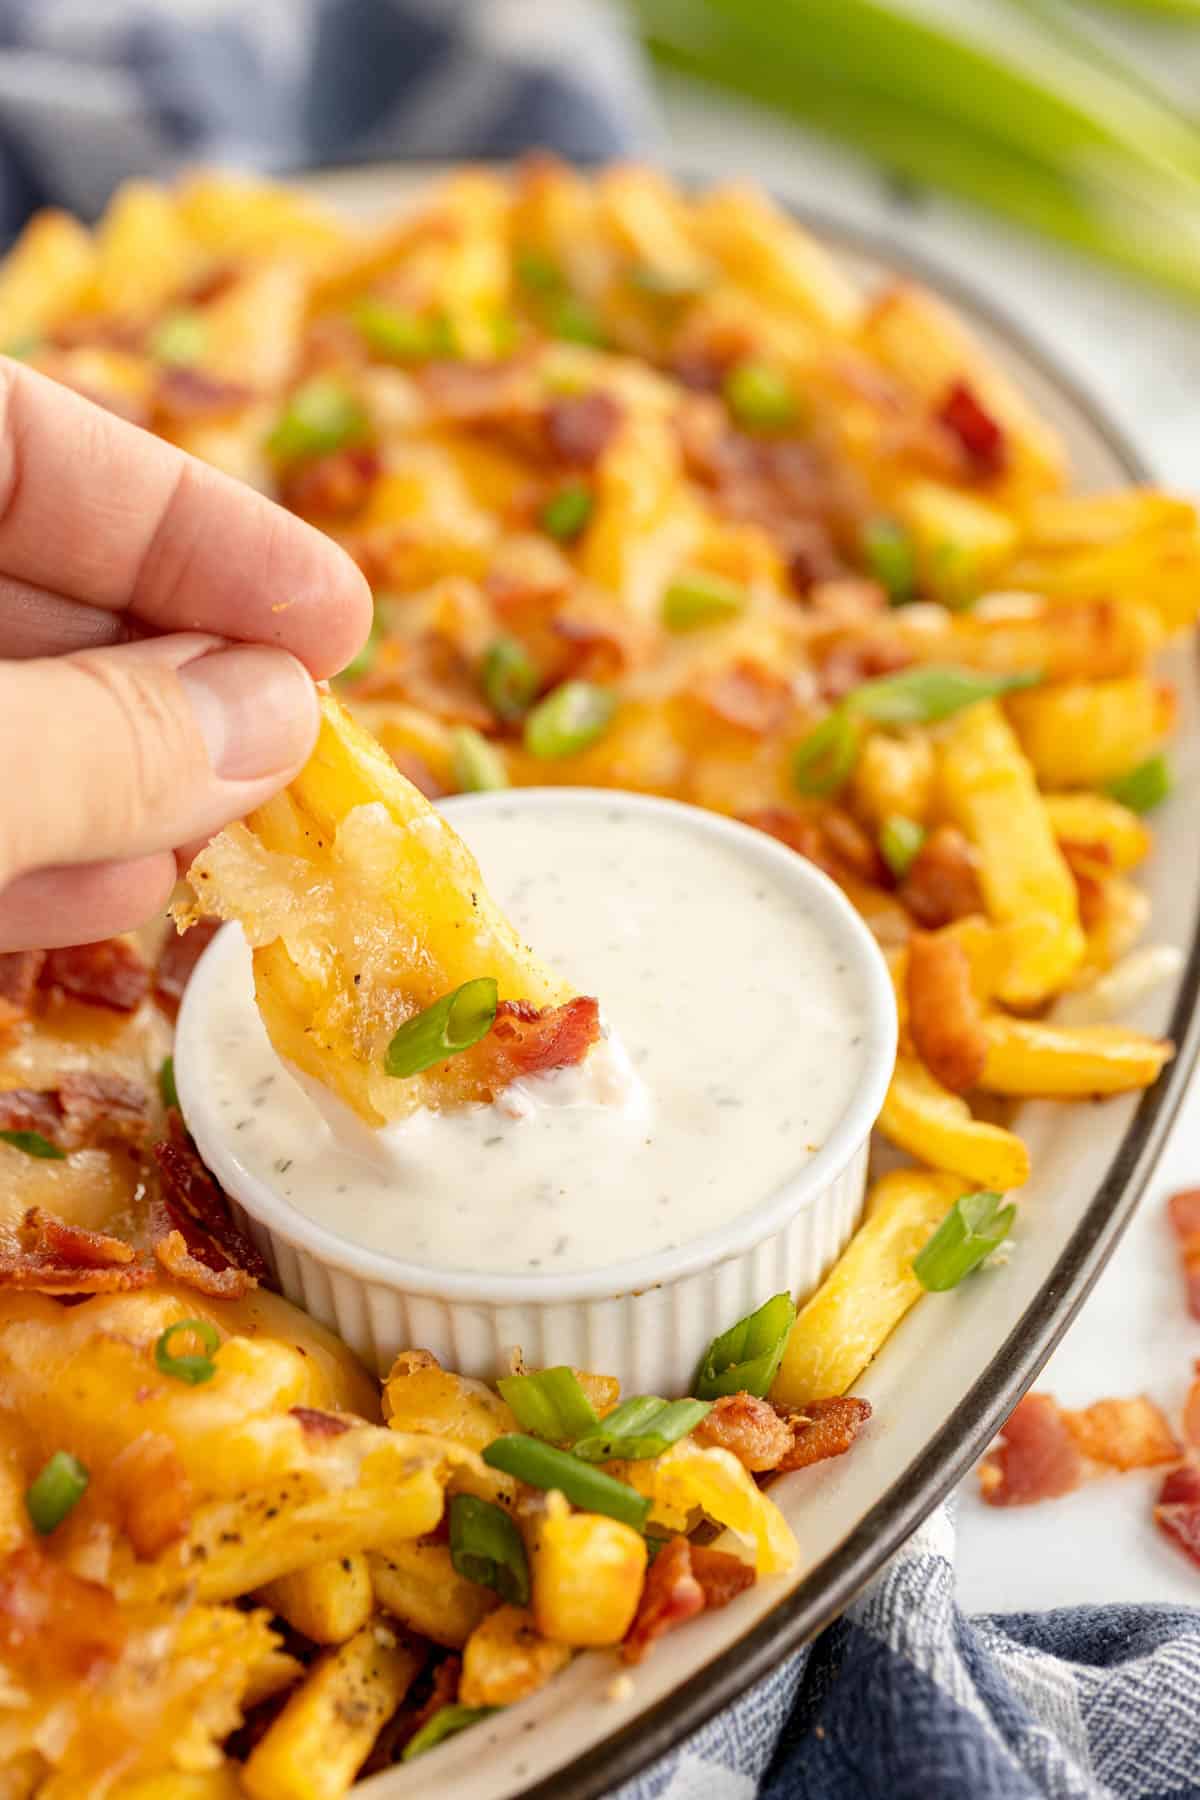 loaded cheese fries on a platter with a hand dipping intoranch dip.